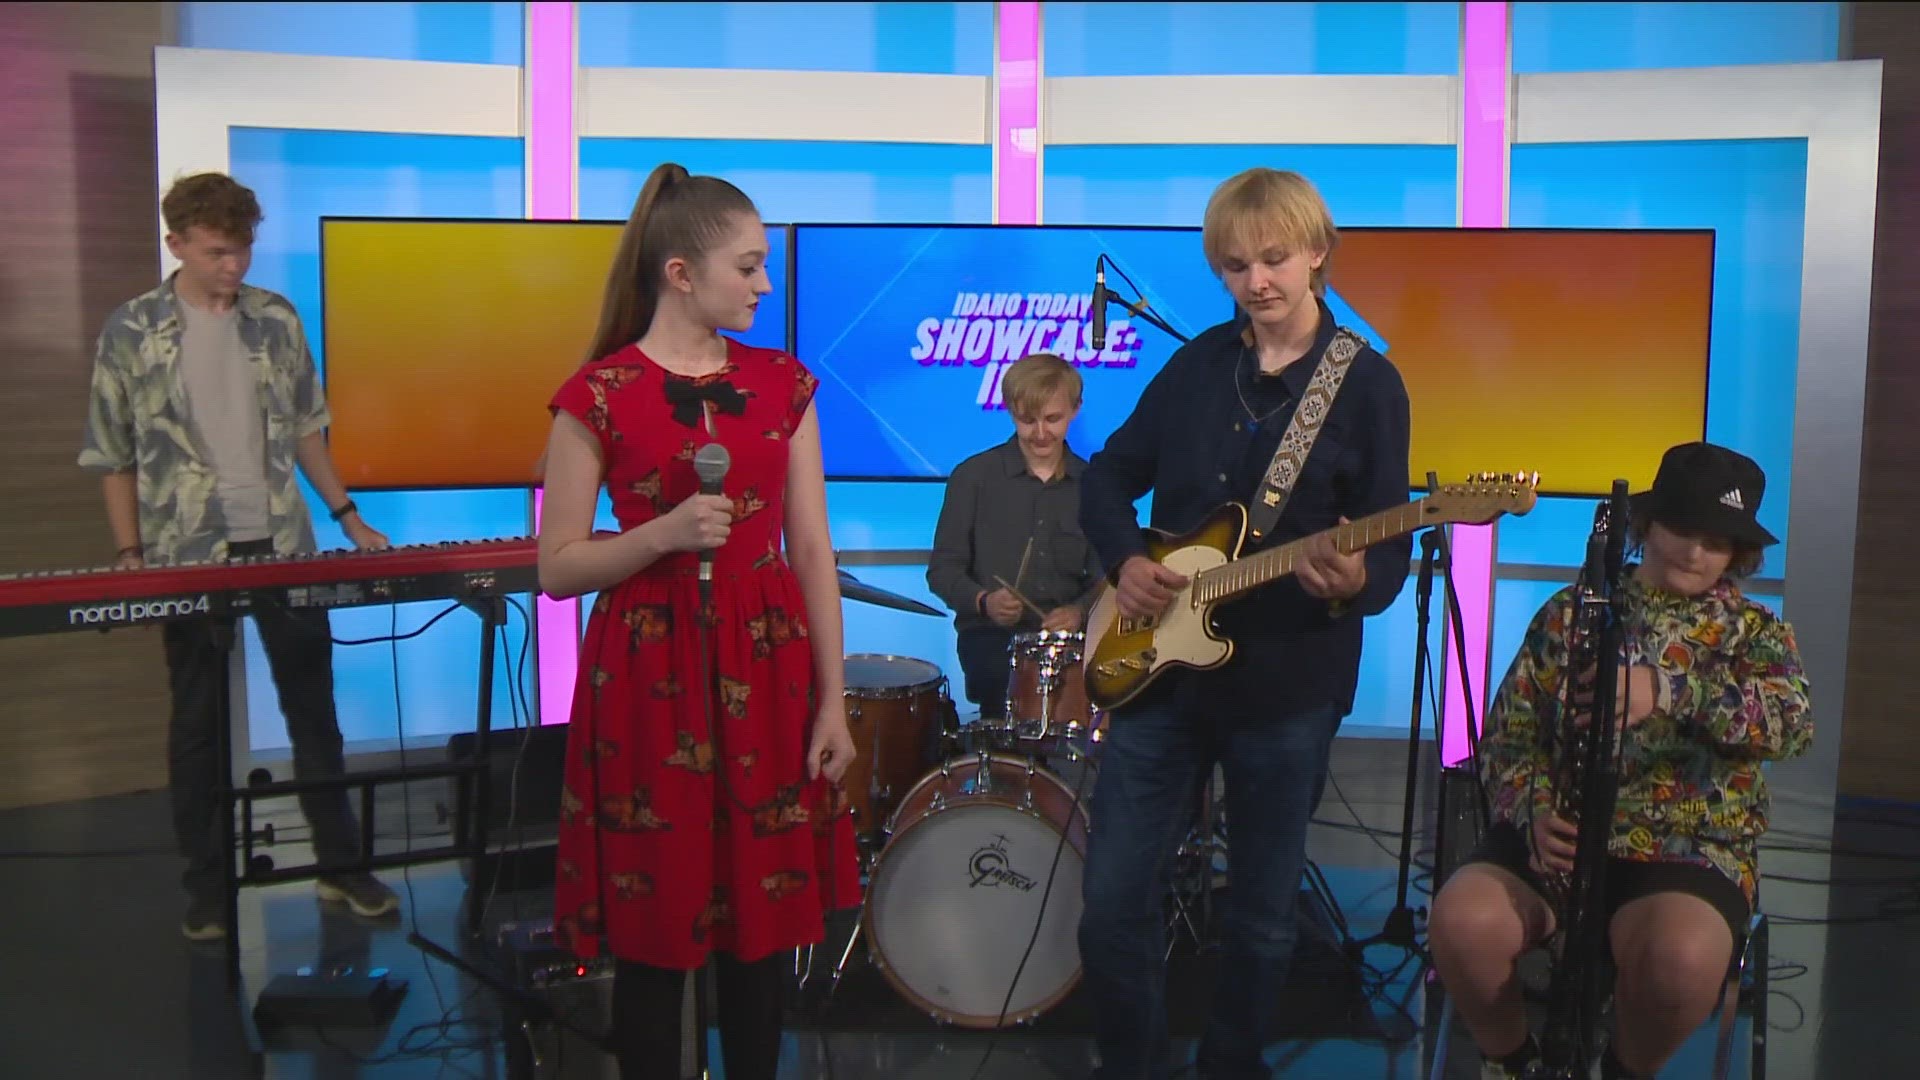 The Idaho Fine Arts Academy stopped by the studio today and we're showcasing their music.